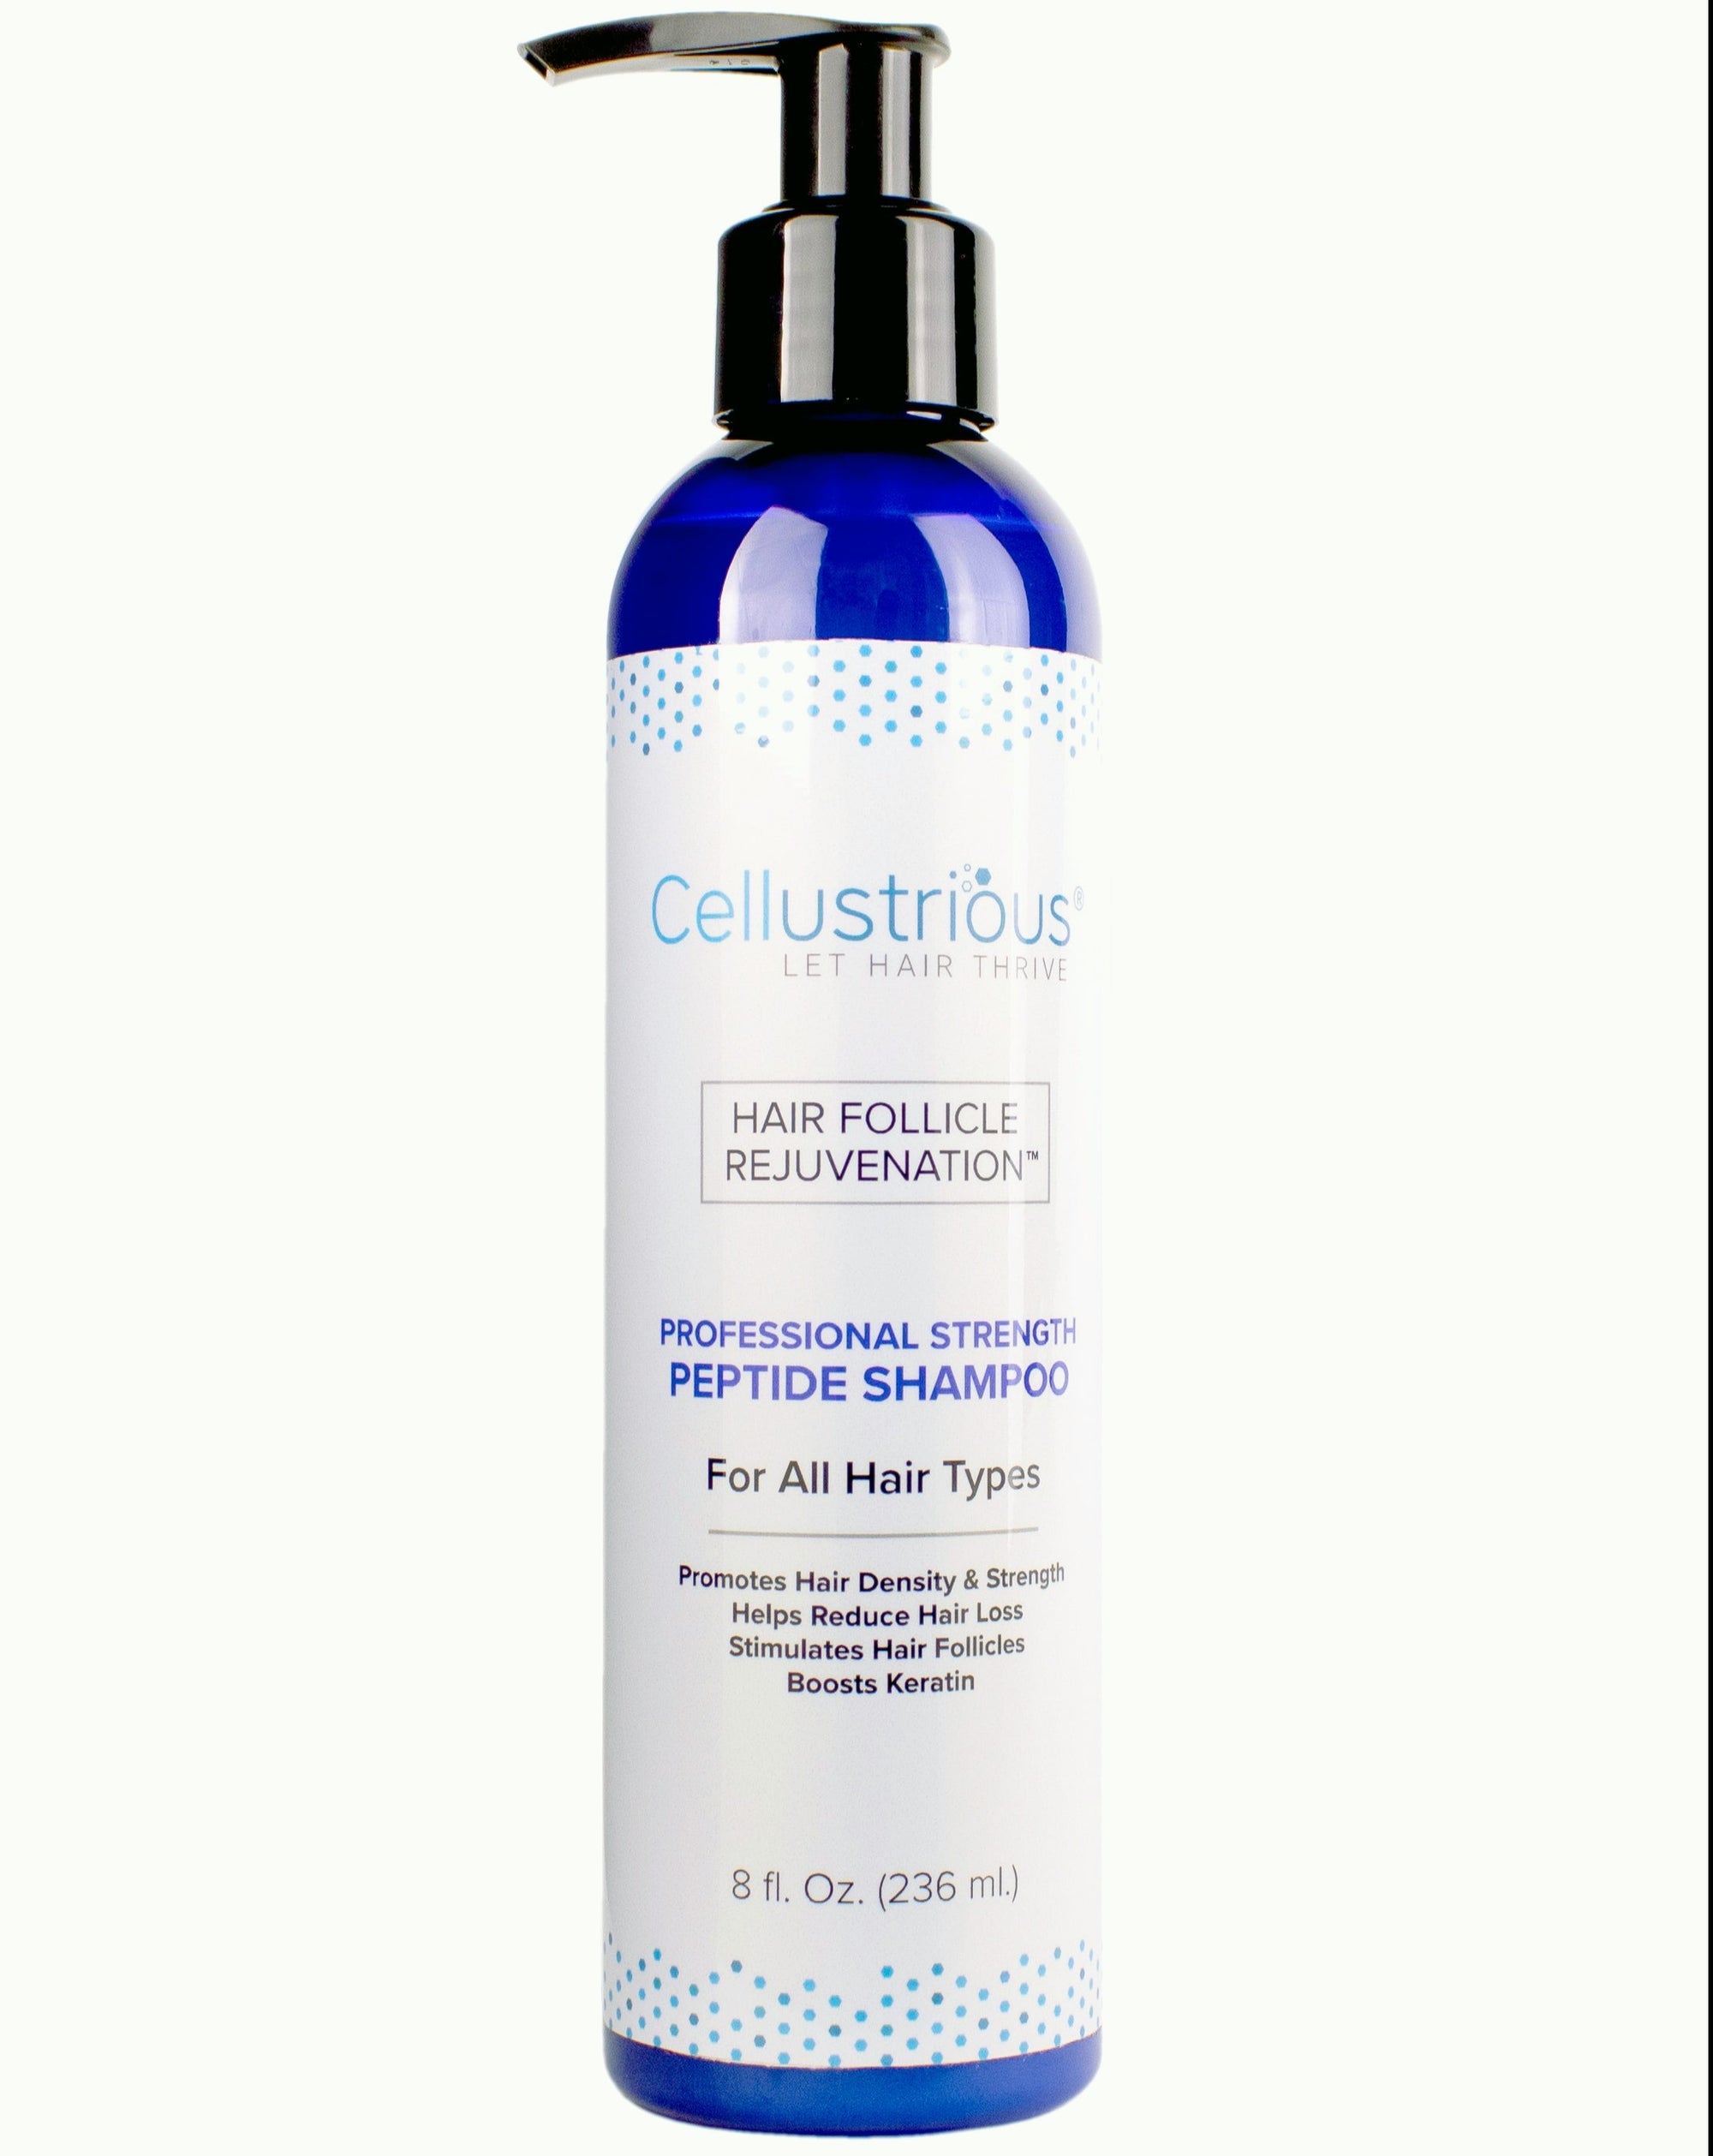 Cellustrious Professional Strength Peptide Shampoo front